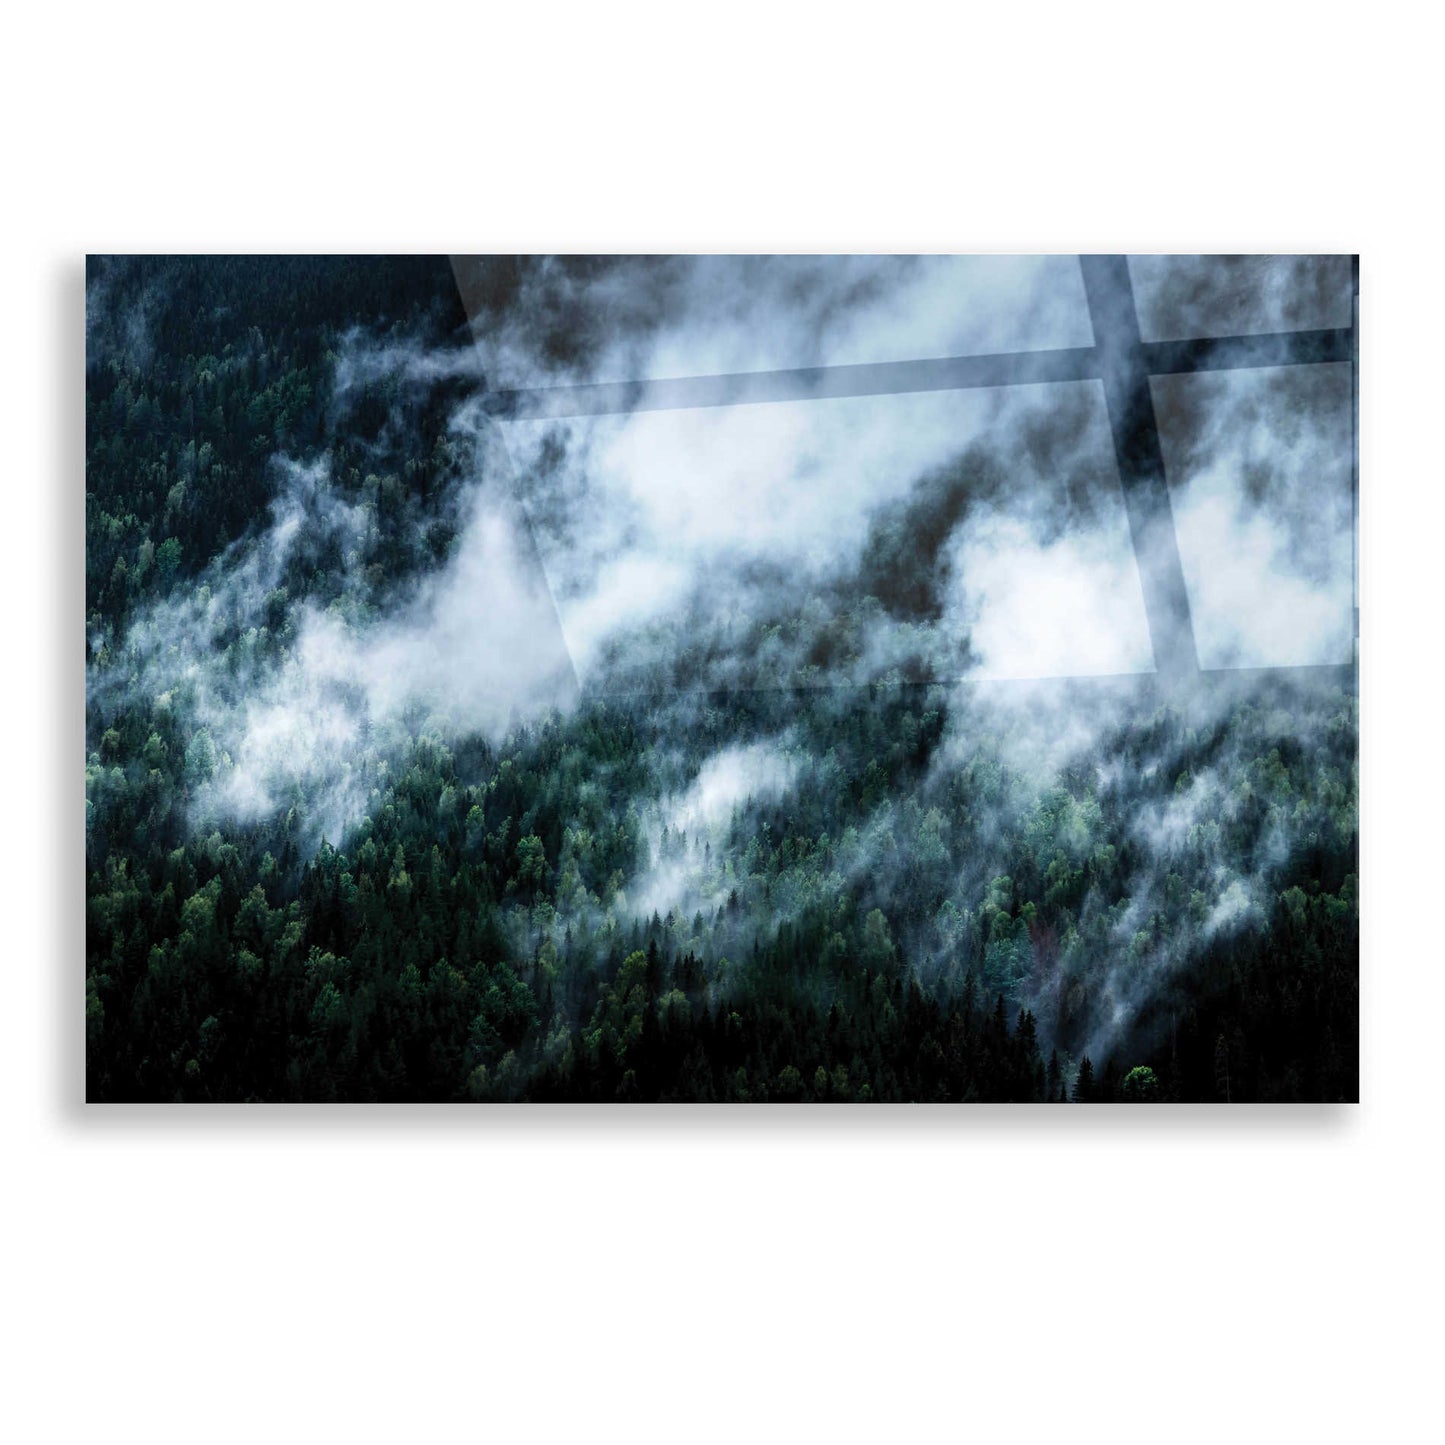 Epic Art 'Foggy Mornings In The Mountains' by Nicklas Gustafsson Acrylic Glass Wall Art,16x12